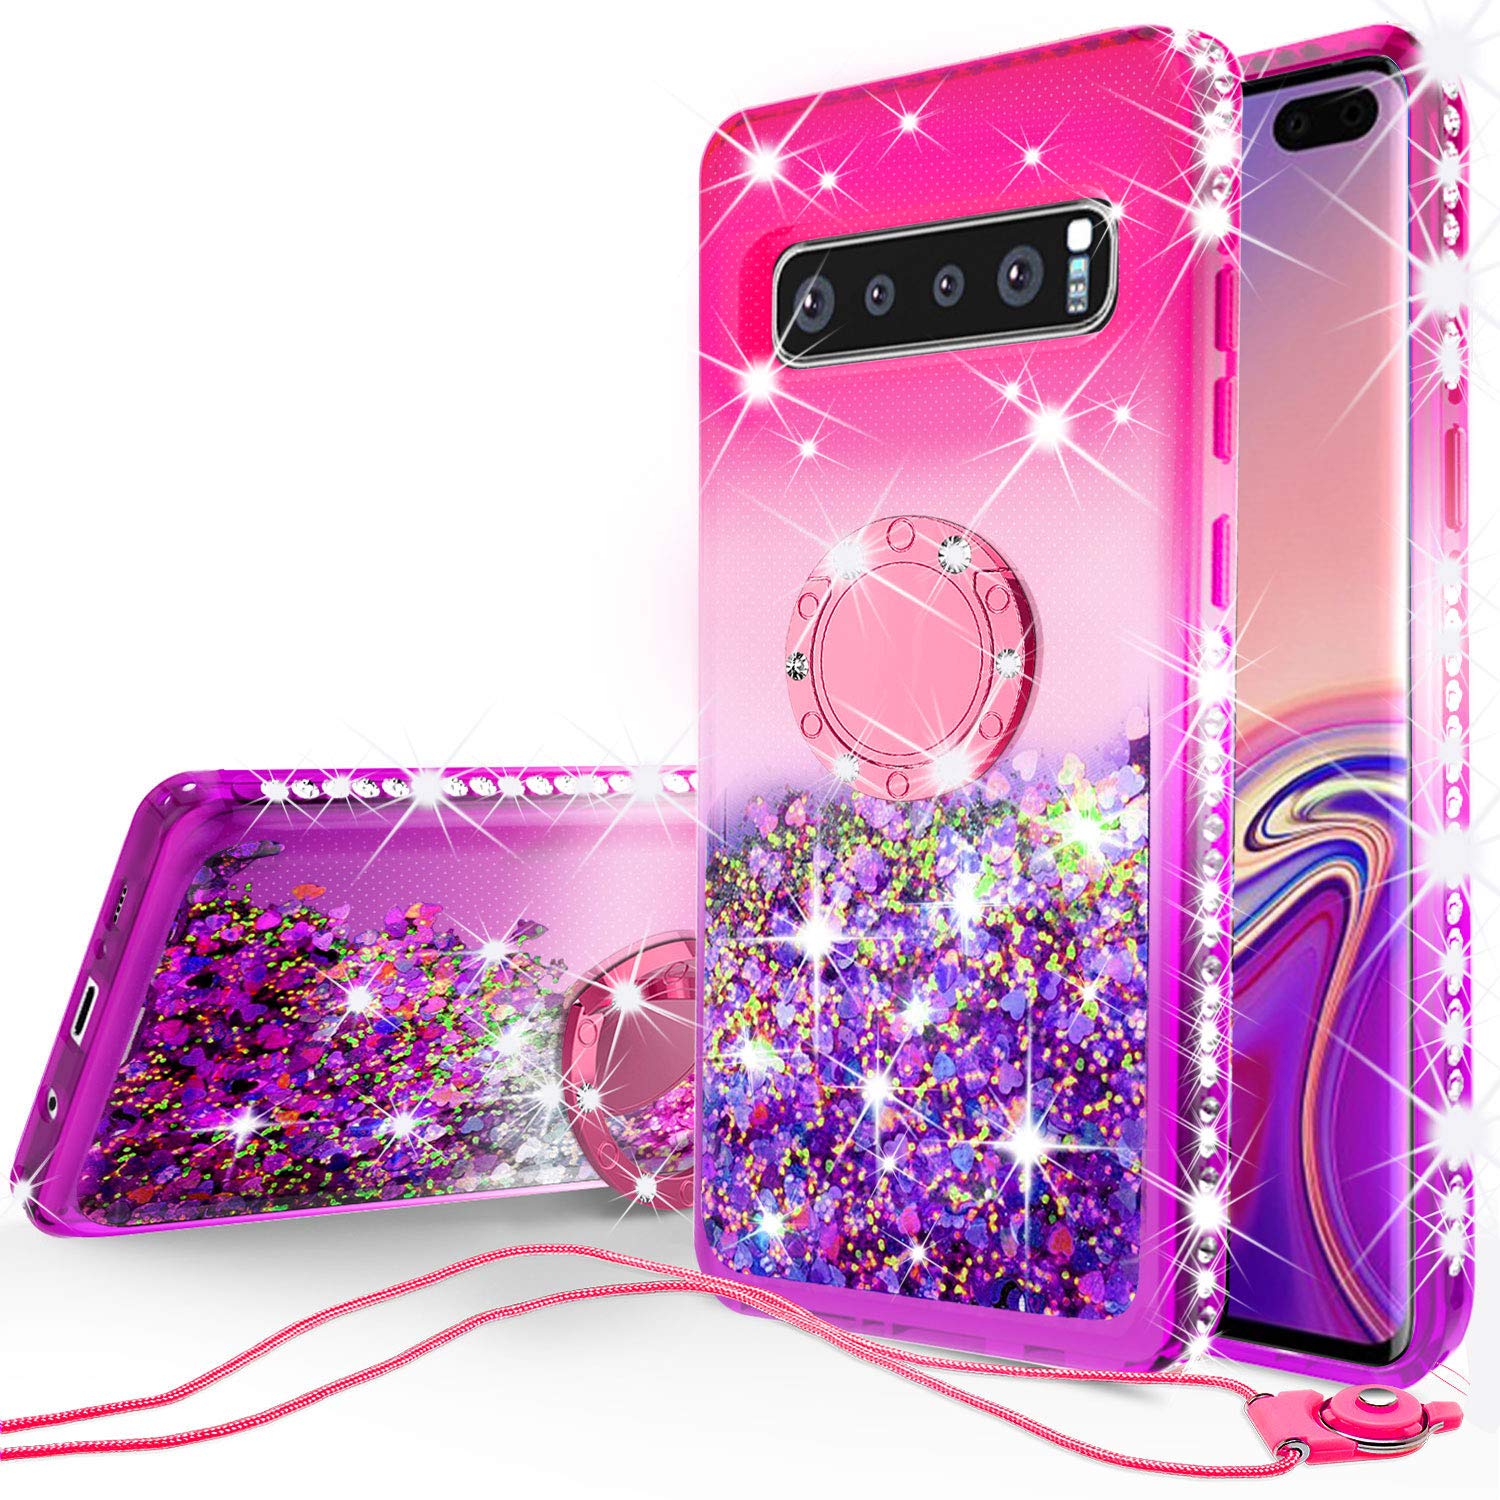 For Samsung Galaxy S10 Case,Ring Stand Glitter Liquid Quicksand Waterfall Floating Sparkle Shiny Bling Diamond Girls Cute Shock Proof Phone Case Cover for Galaxy S10 - Hot Pink/Blue - image 1 of 5